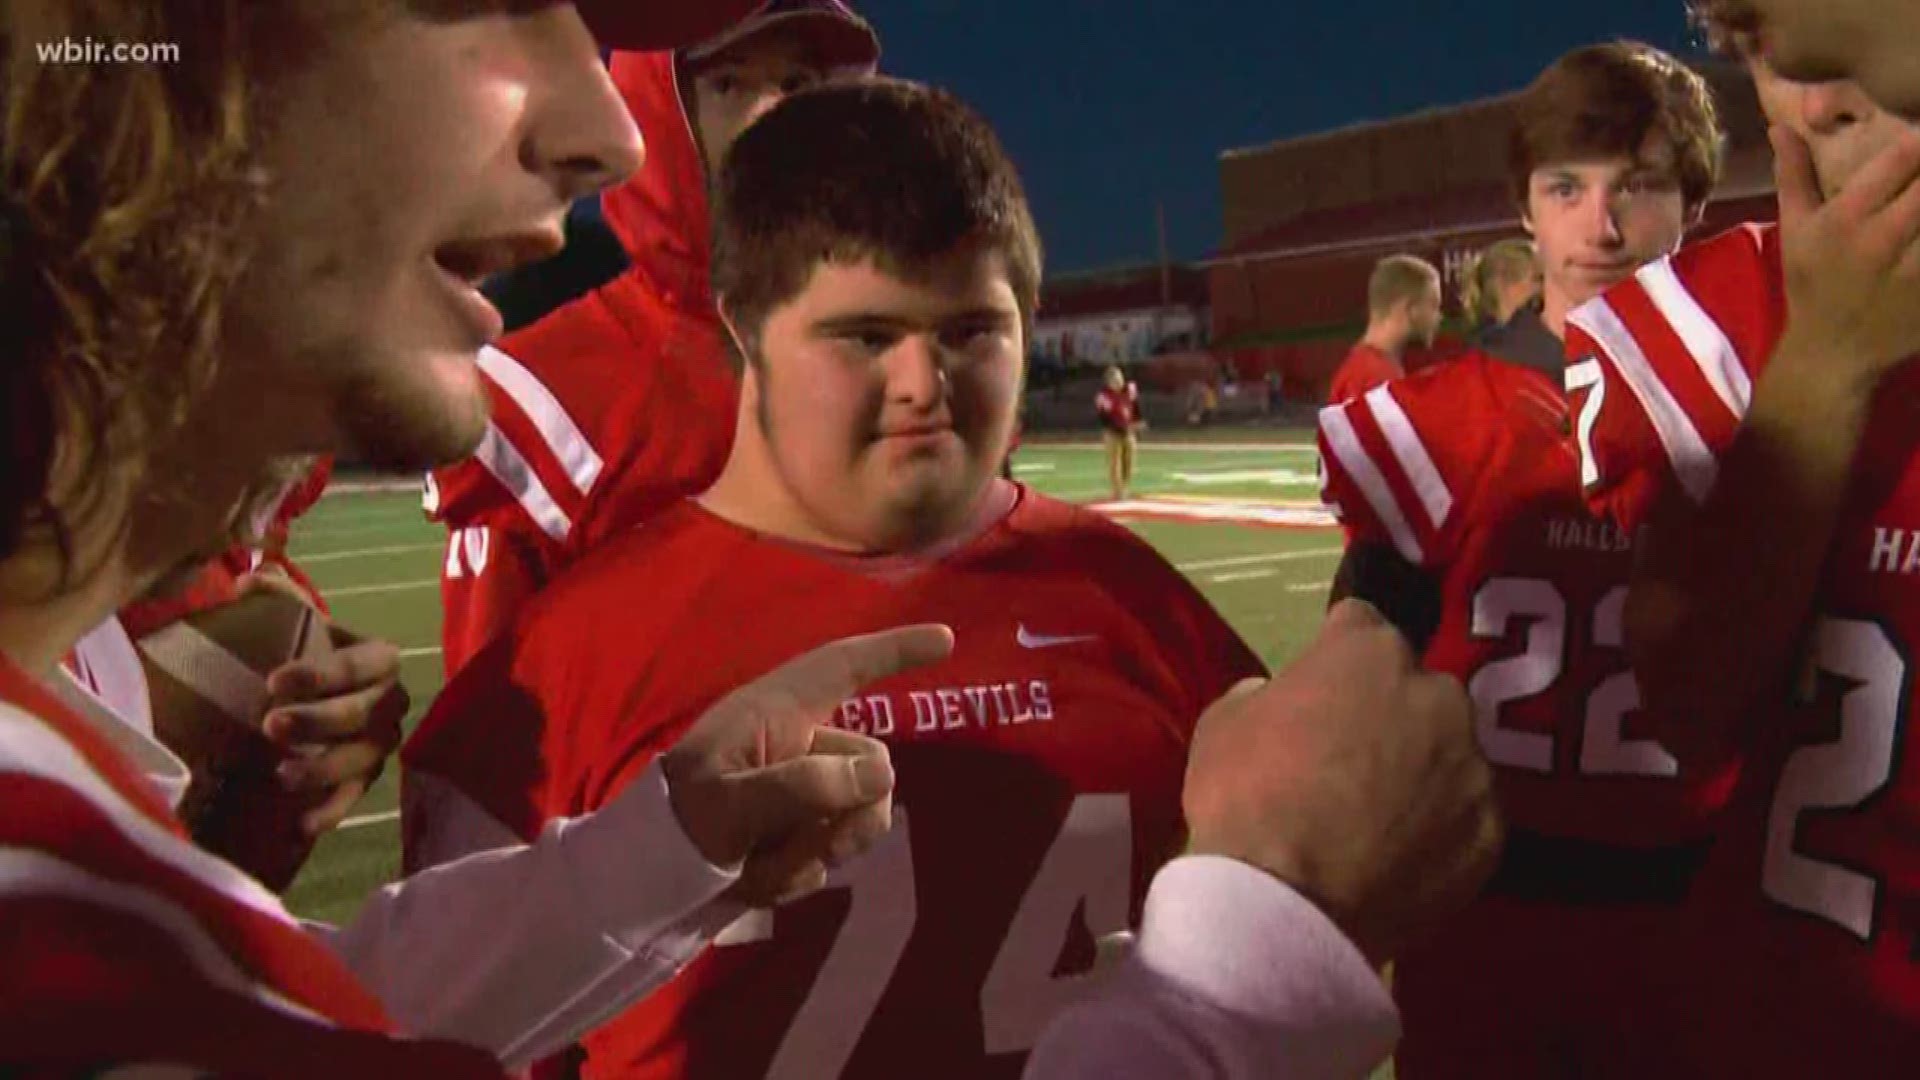 Students and athletes come together to make football dreams come true at Halls.